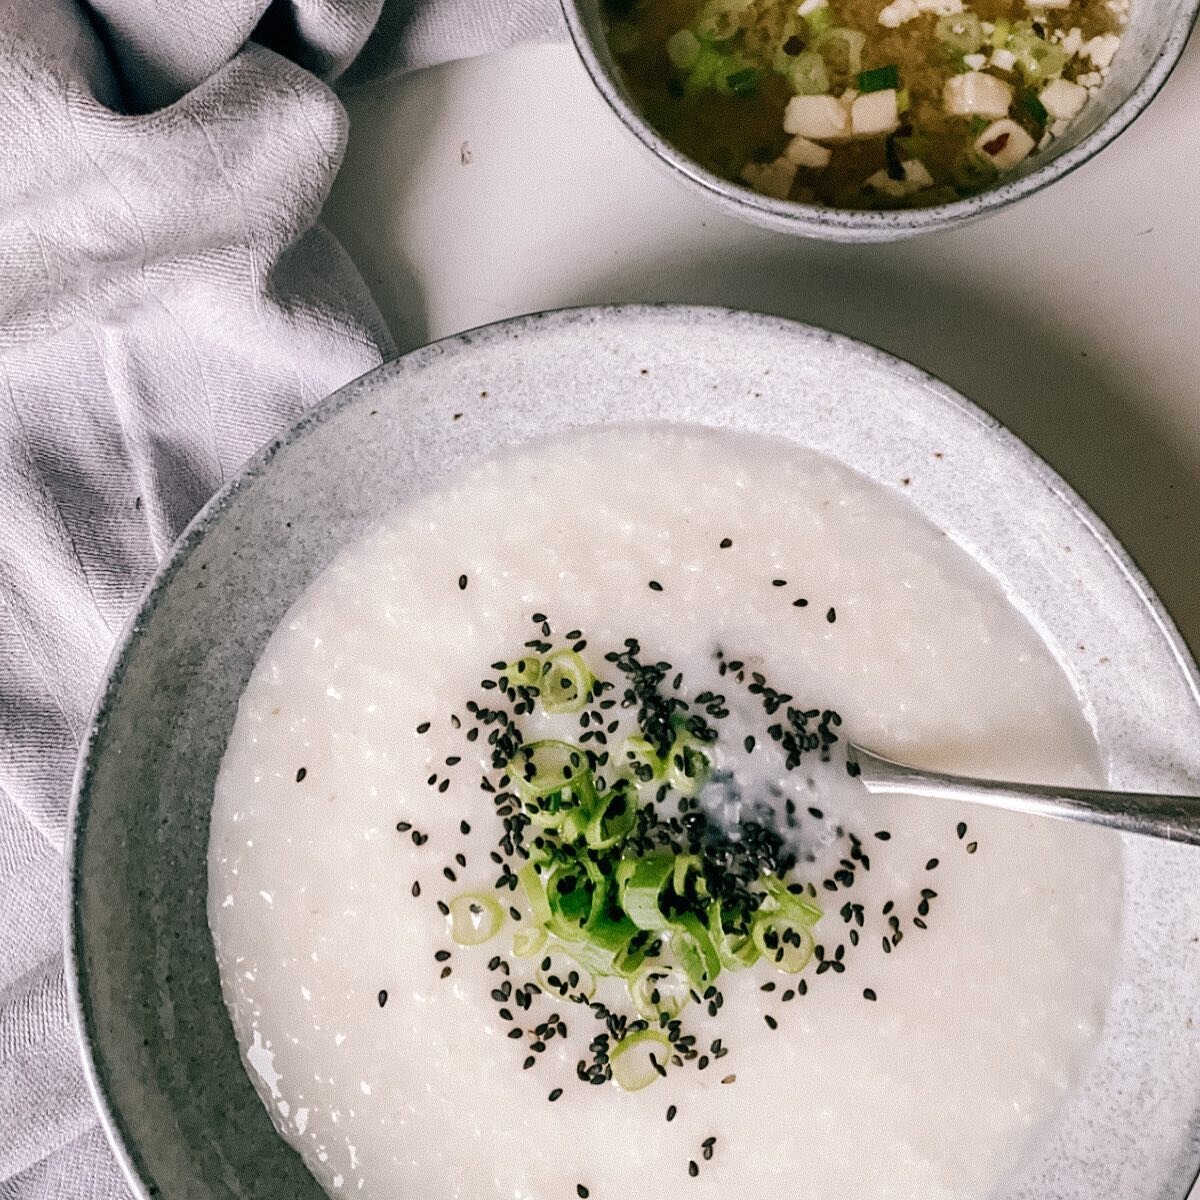 Kanji, Kunyi or Congee - a healing meal for many occasions, especially to get well! 🥣 

As you have probably seen, I have had quite an accident as well as an infection and I ate a lot of this dish which helped me immensely. And it&rsquo;s time to sh